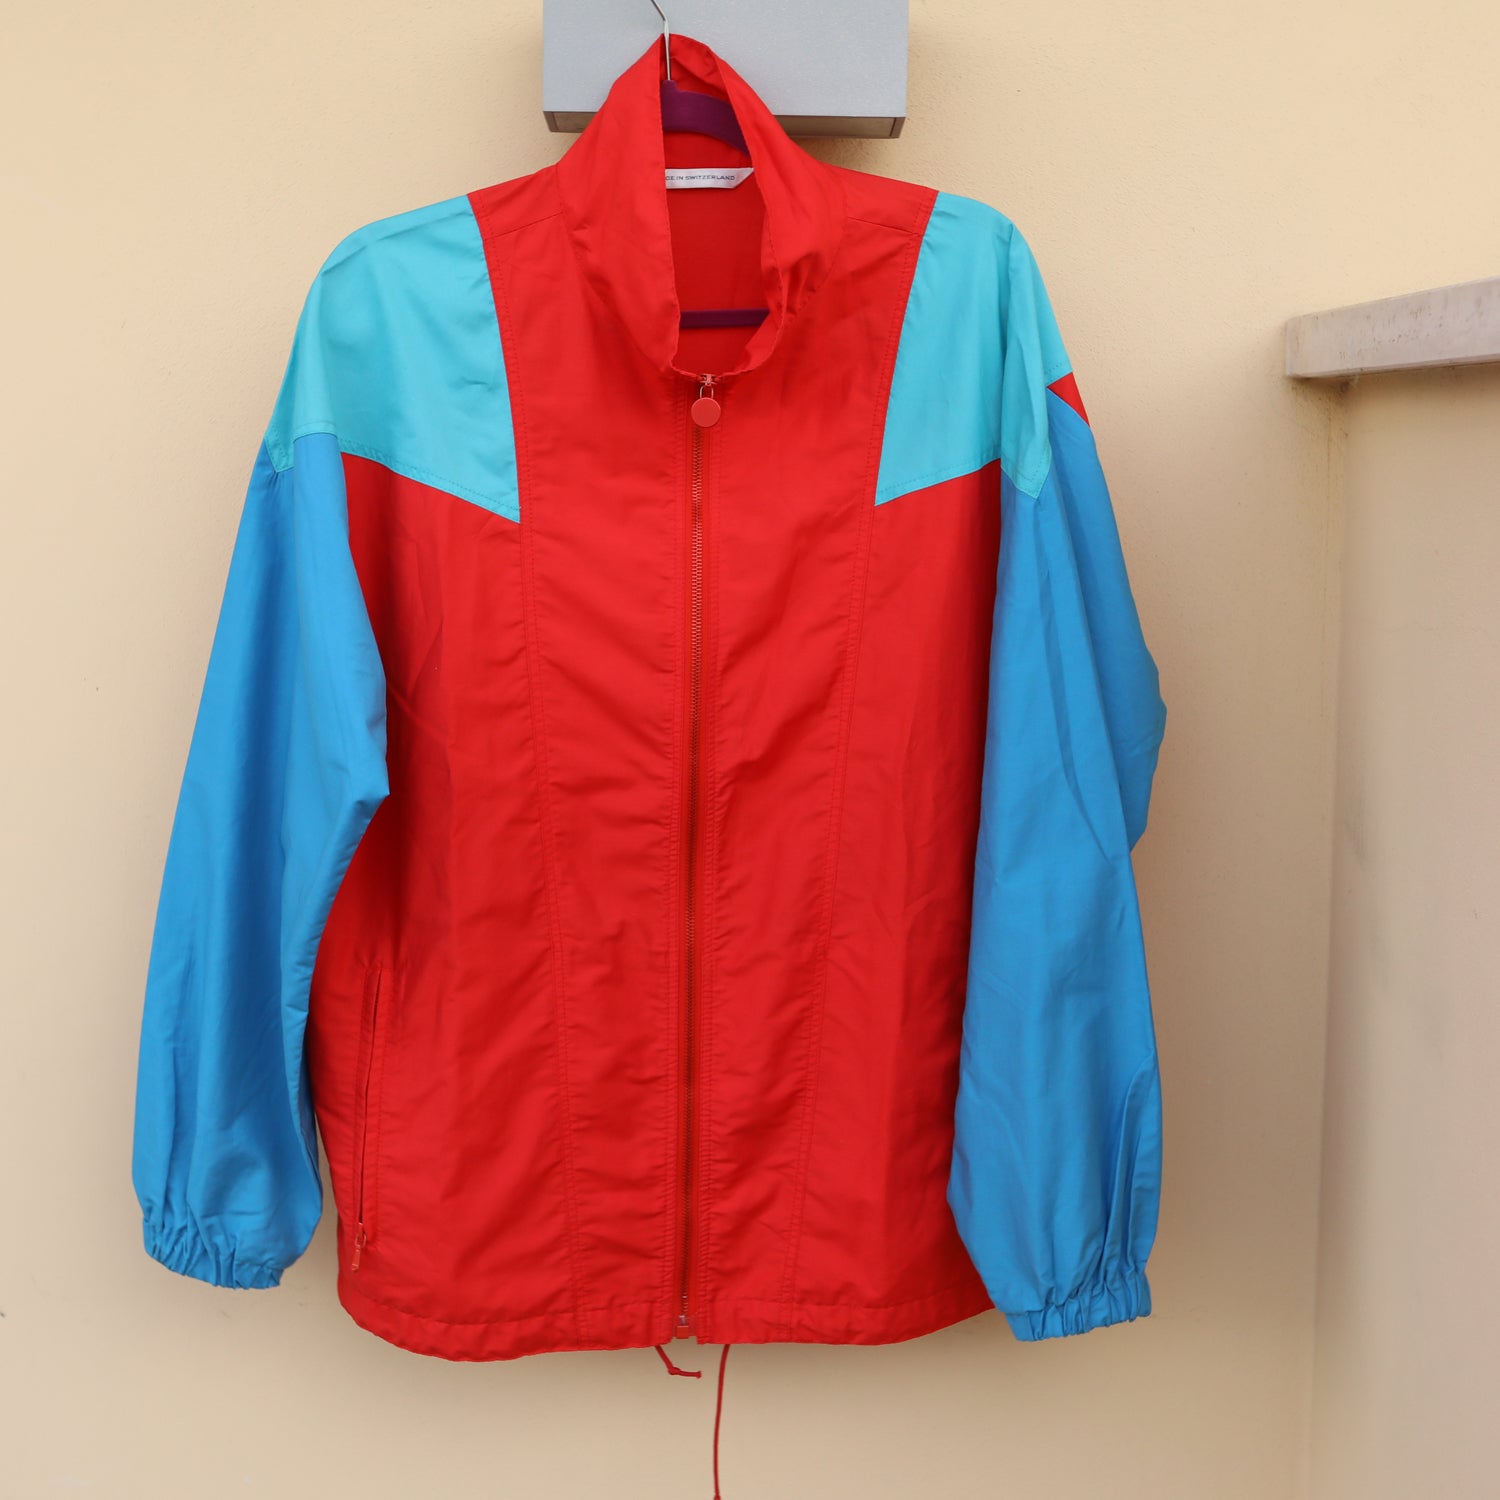 Vintage Eighties Bright Red and Blue Cotton Windbreaker